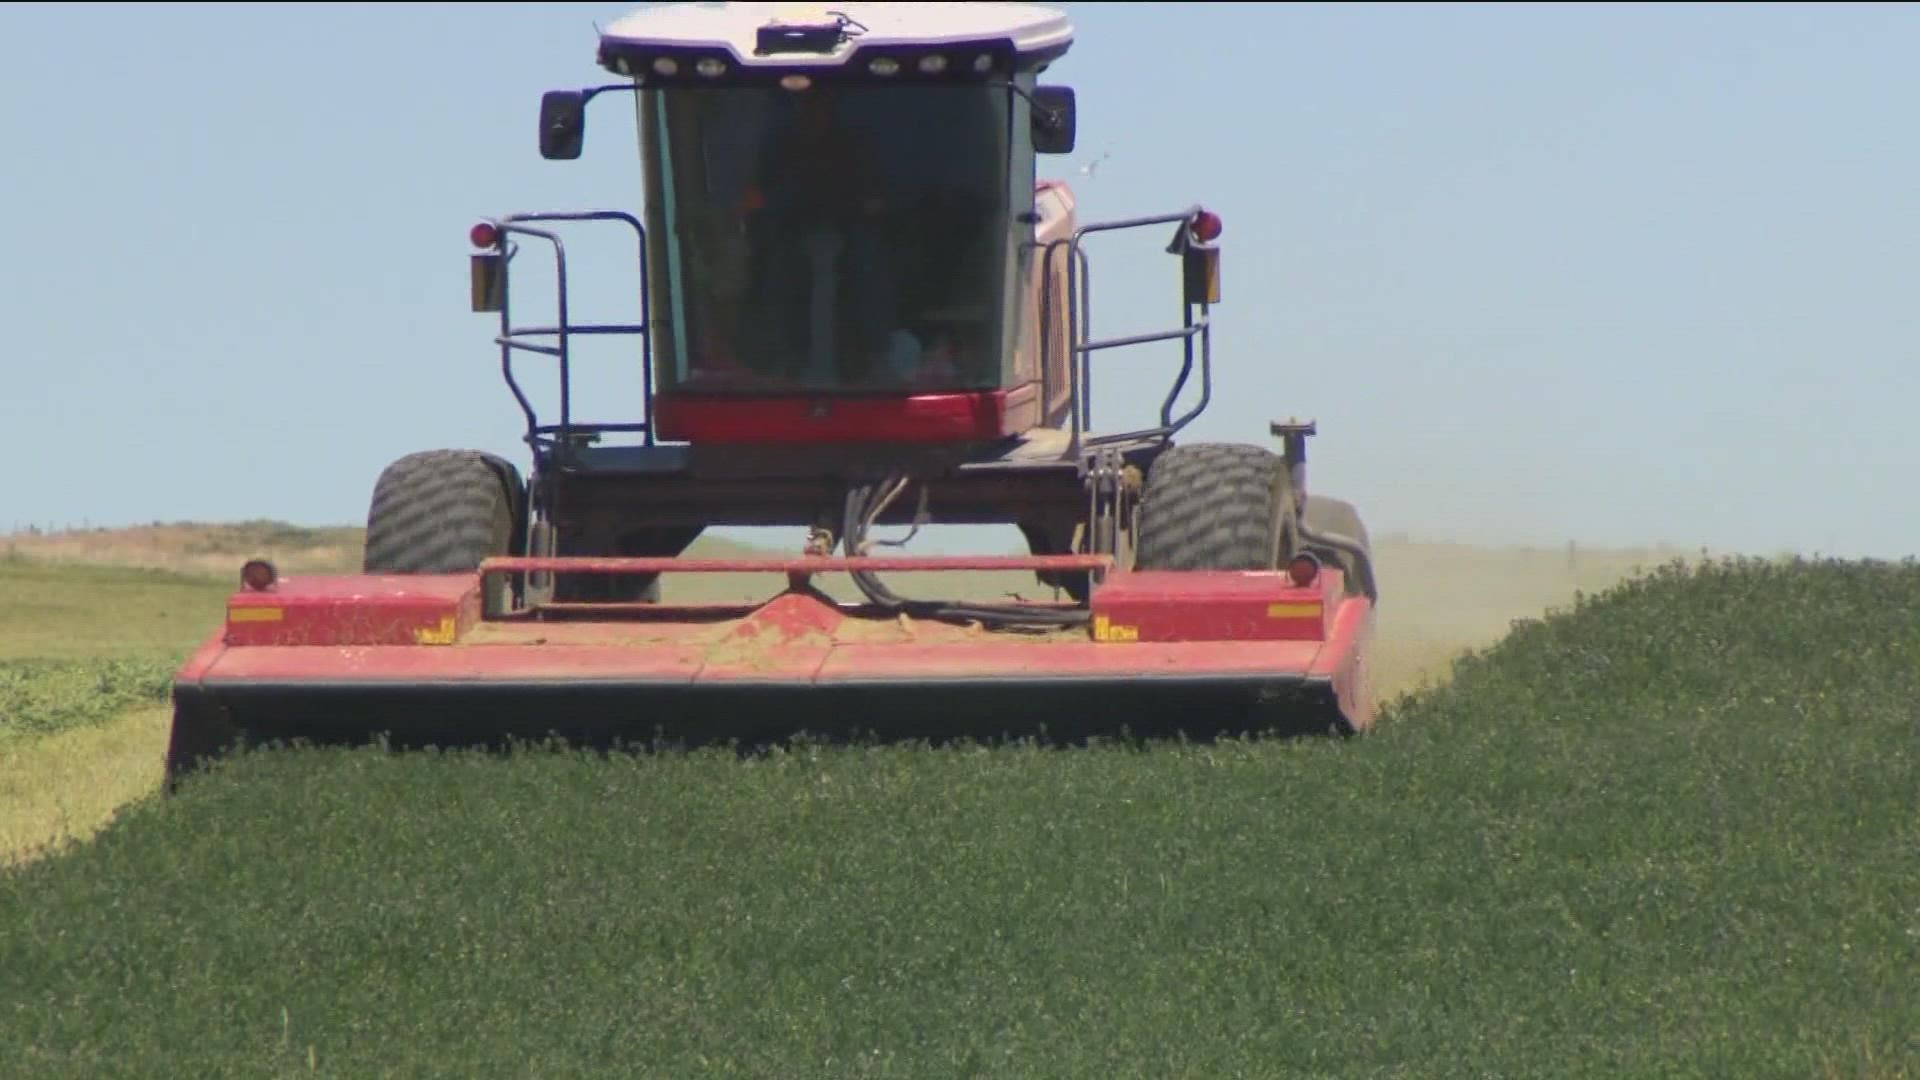 A railroad strike would have significant impacts on Idaho's agriculture industry and economy, but a deal met Thursday appears to avoid that situation.